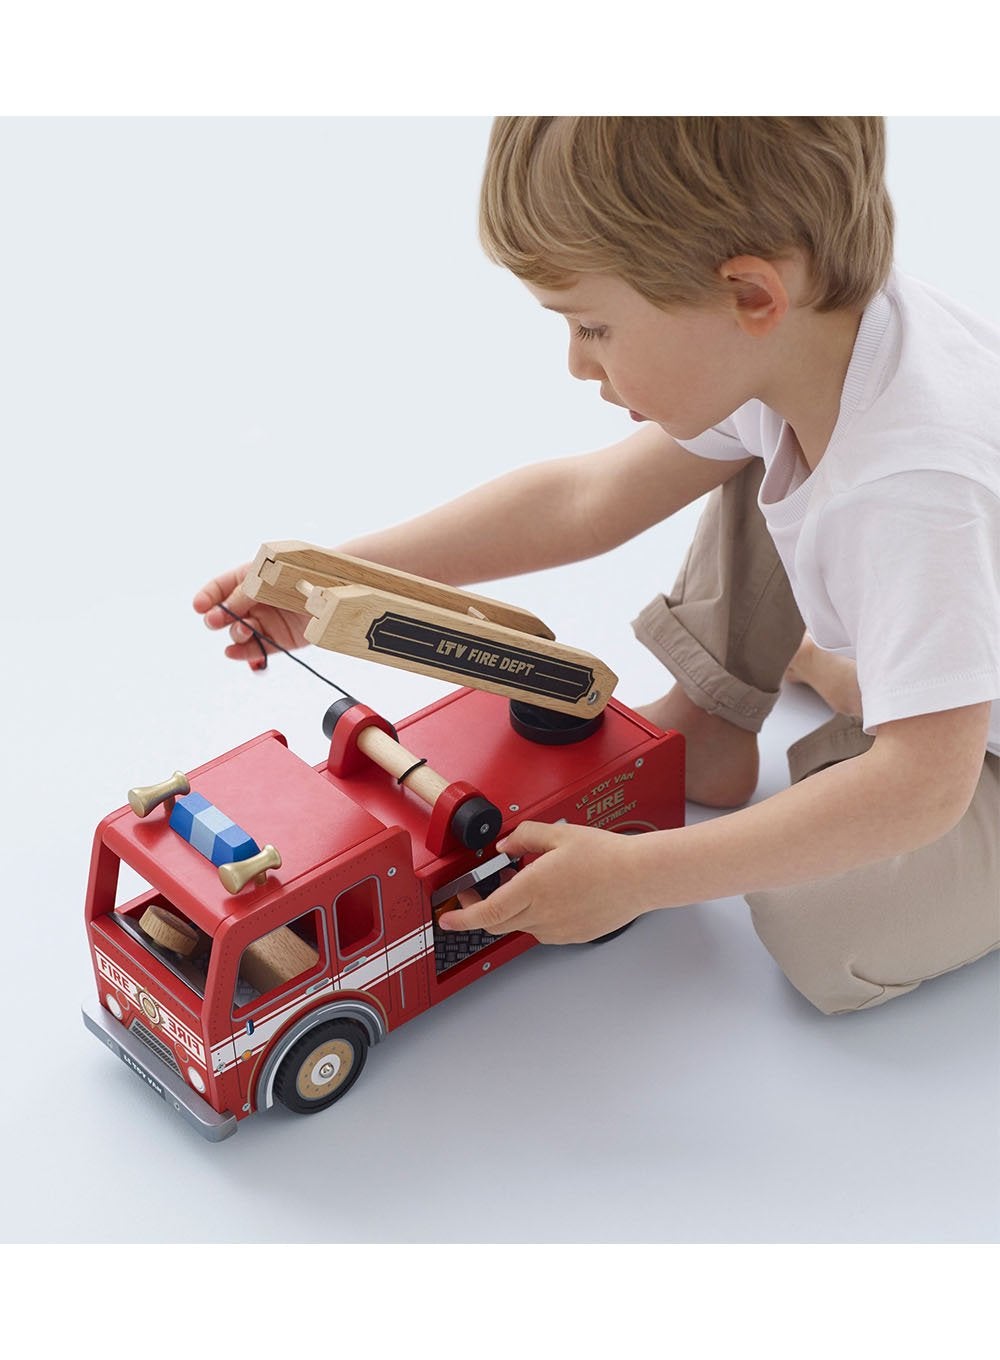 Le Toy Van Toy Wooden Fire Engine